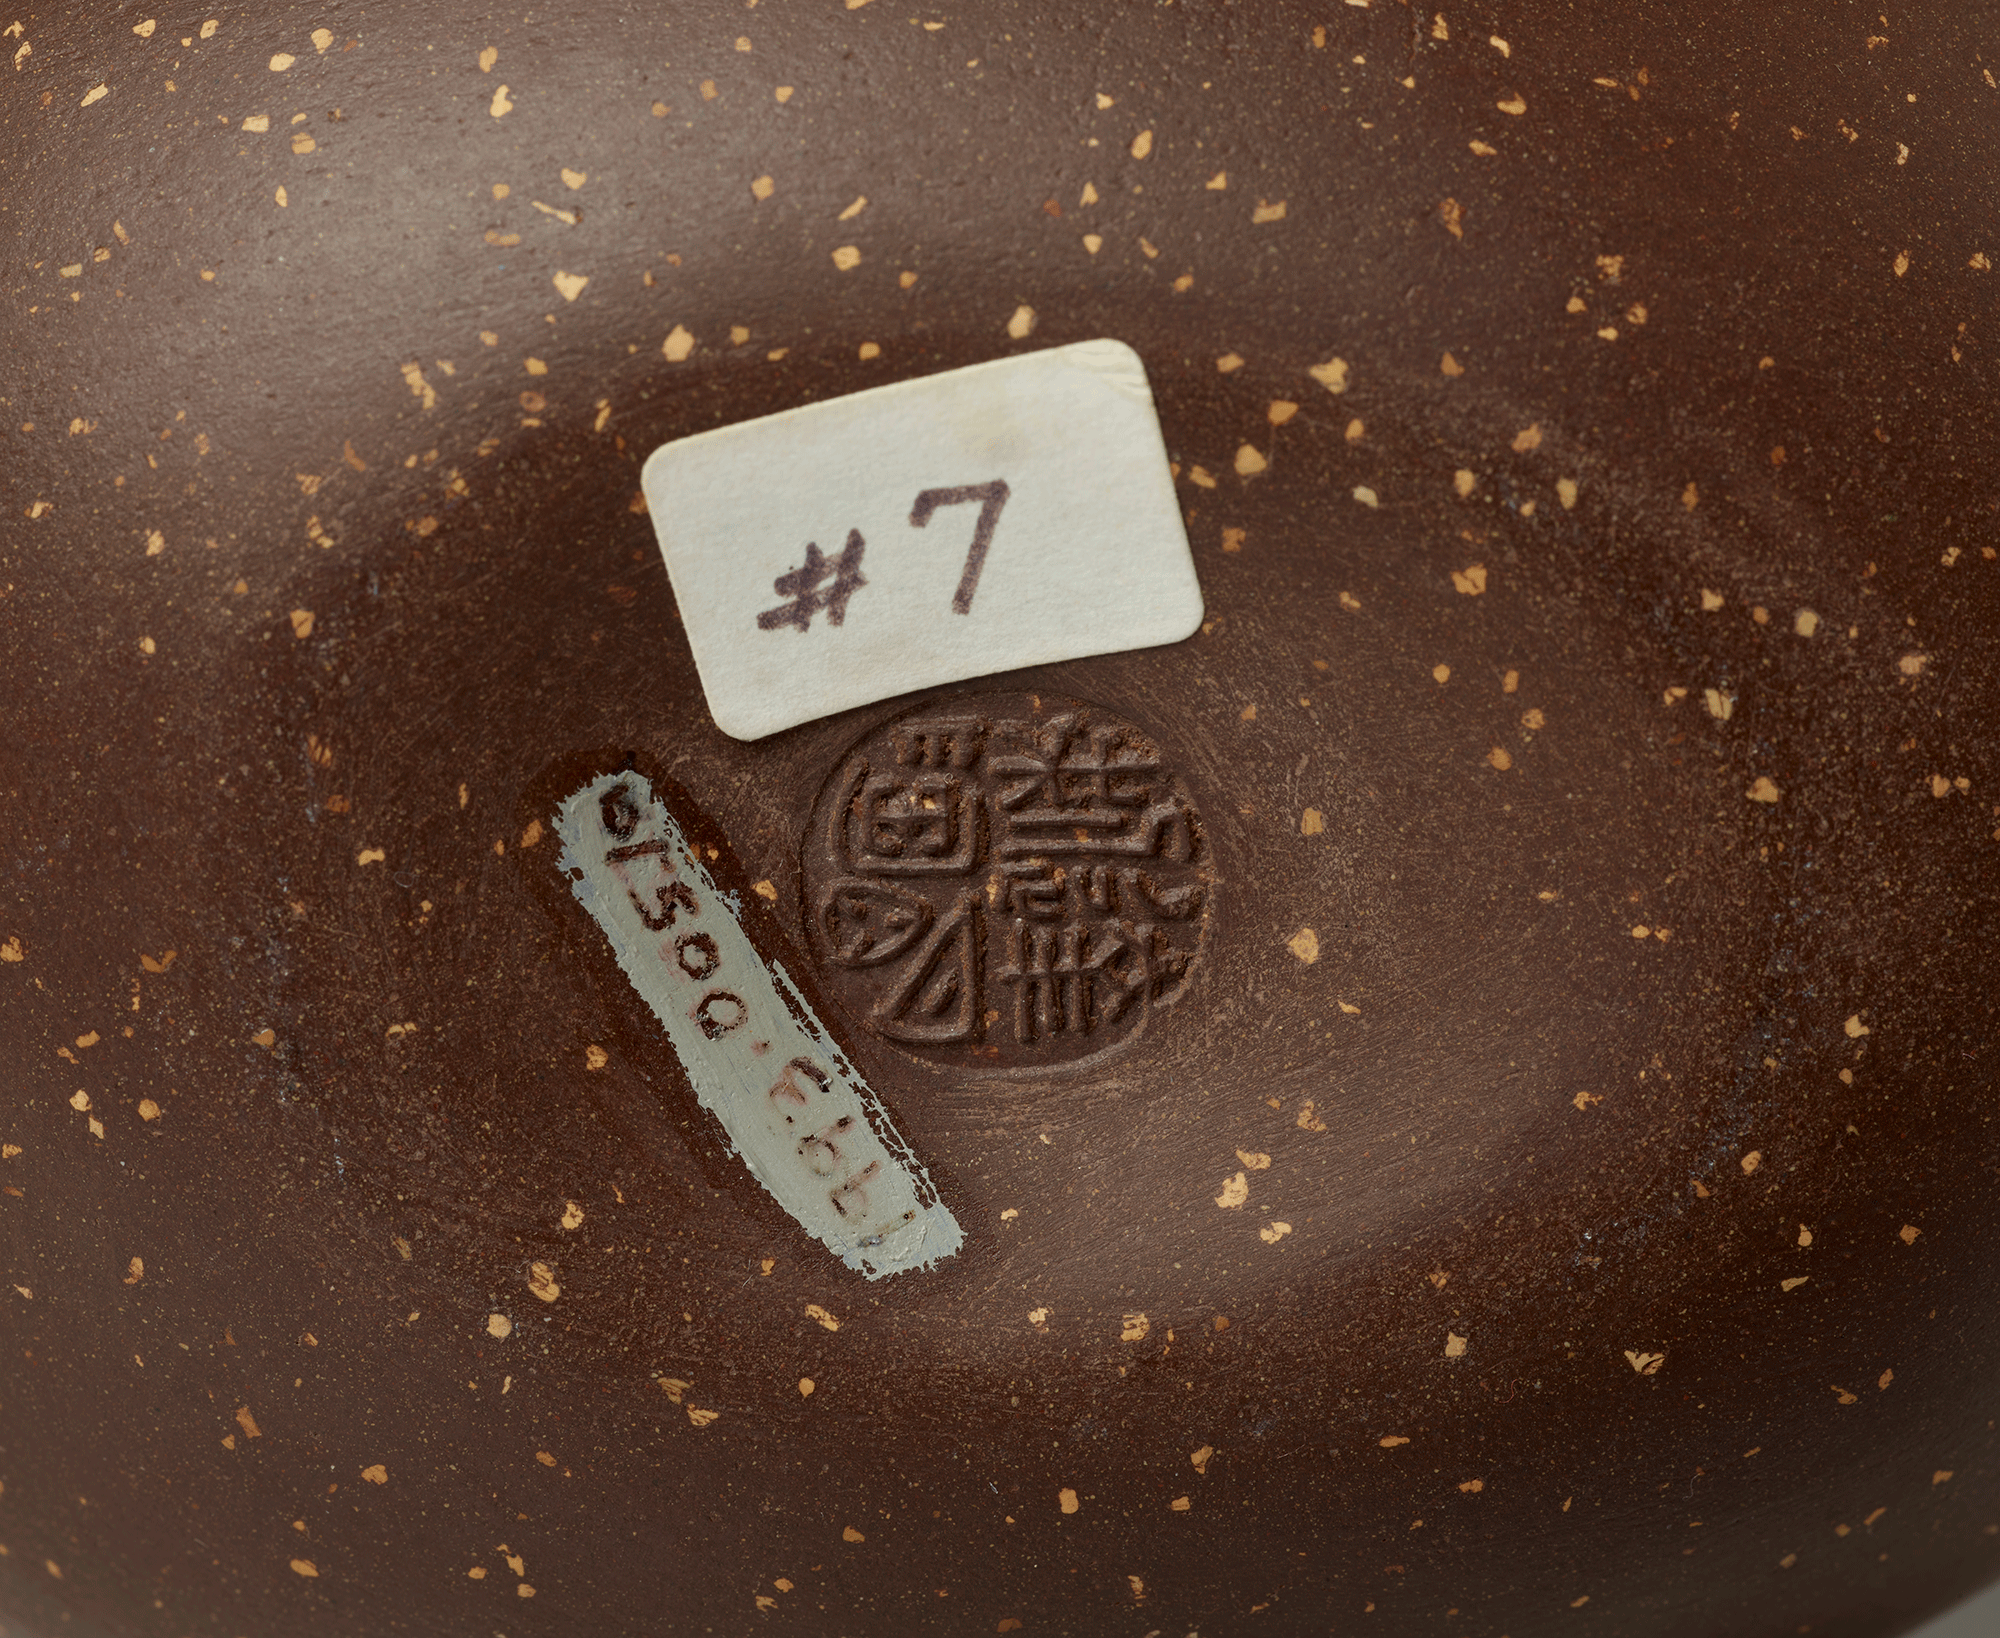 Underside of teapot. Chinese letters in a circular pattern stamped into the center. White, rectangular stick above with “# 7” written in brown ink. Accession number is visible.